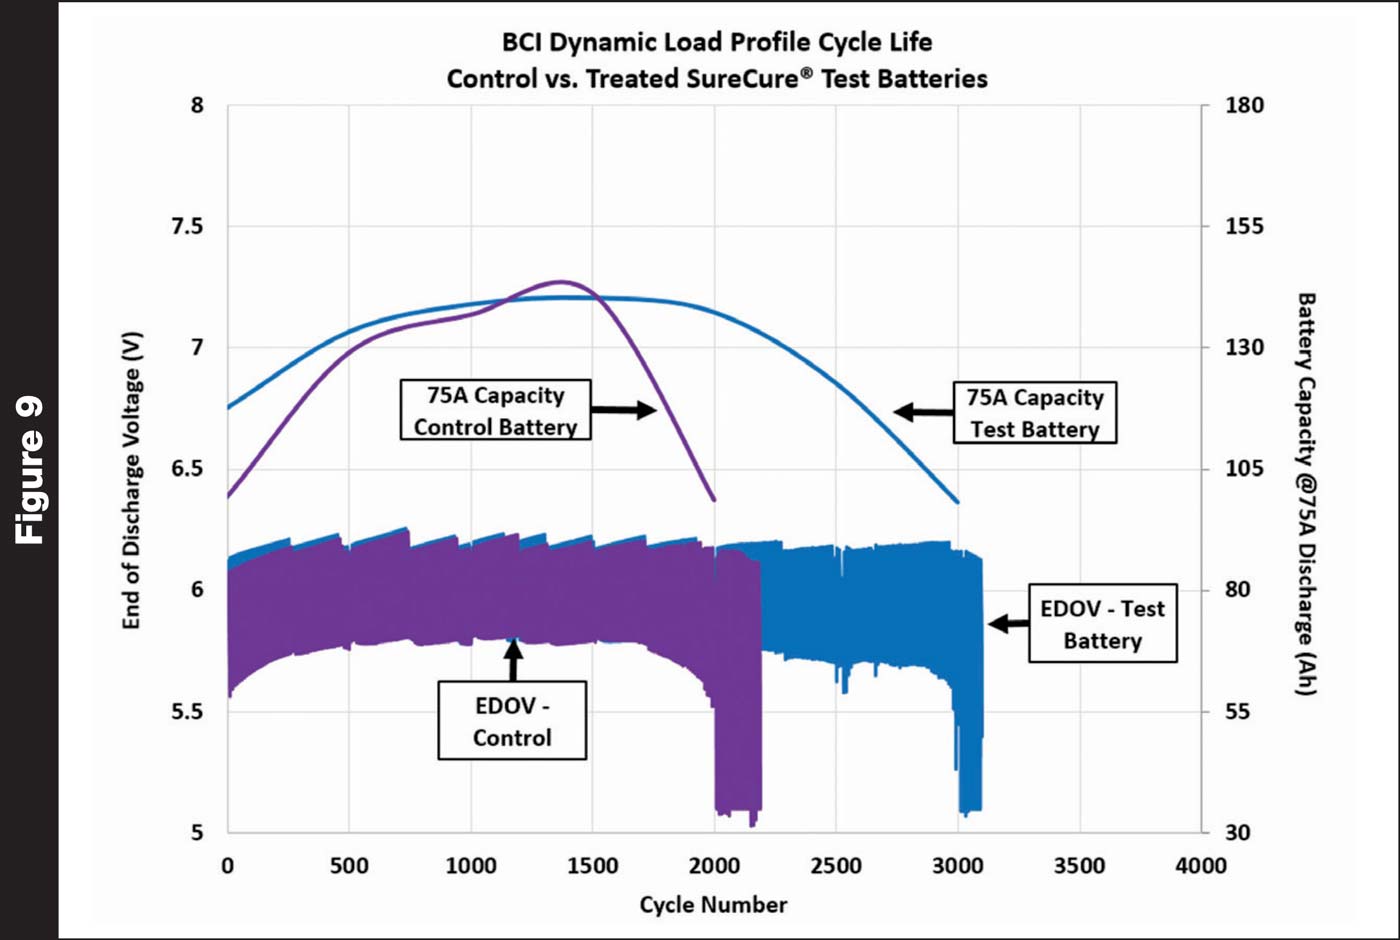 BCI-Dynamic-Load_Profile_Cycle_Life-vs-Treated-SureCure-Test-Bateries-1400